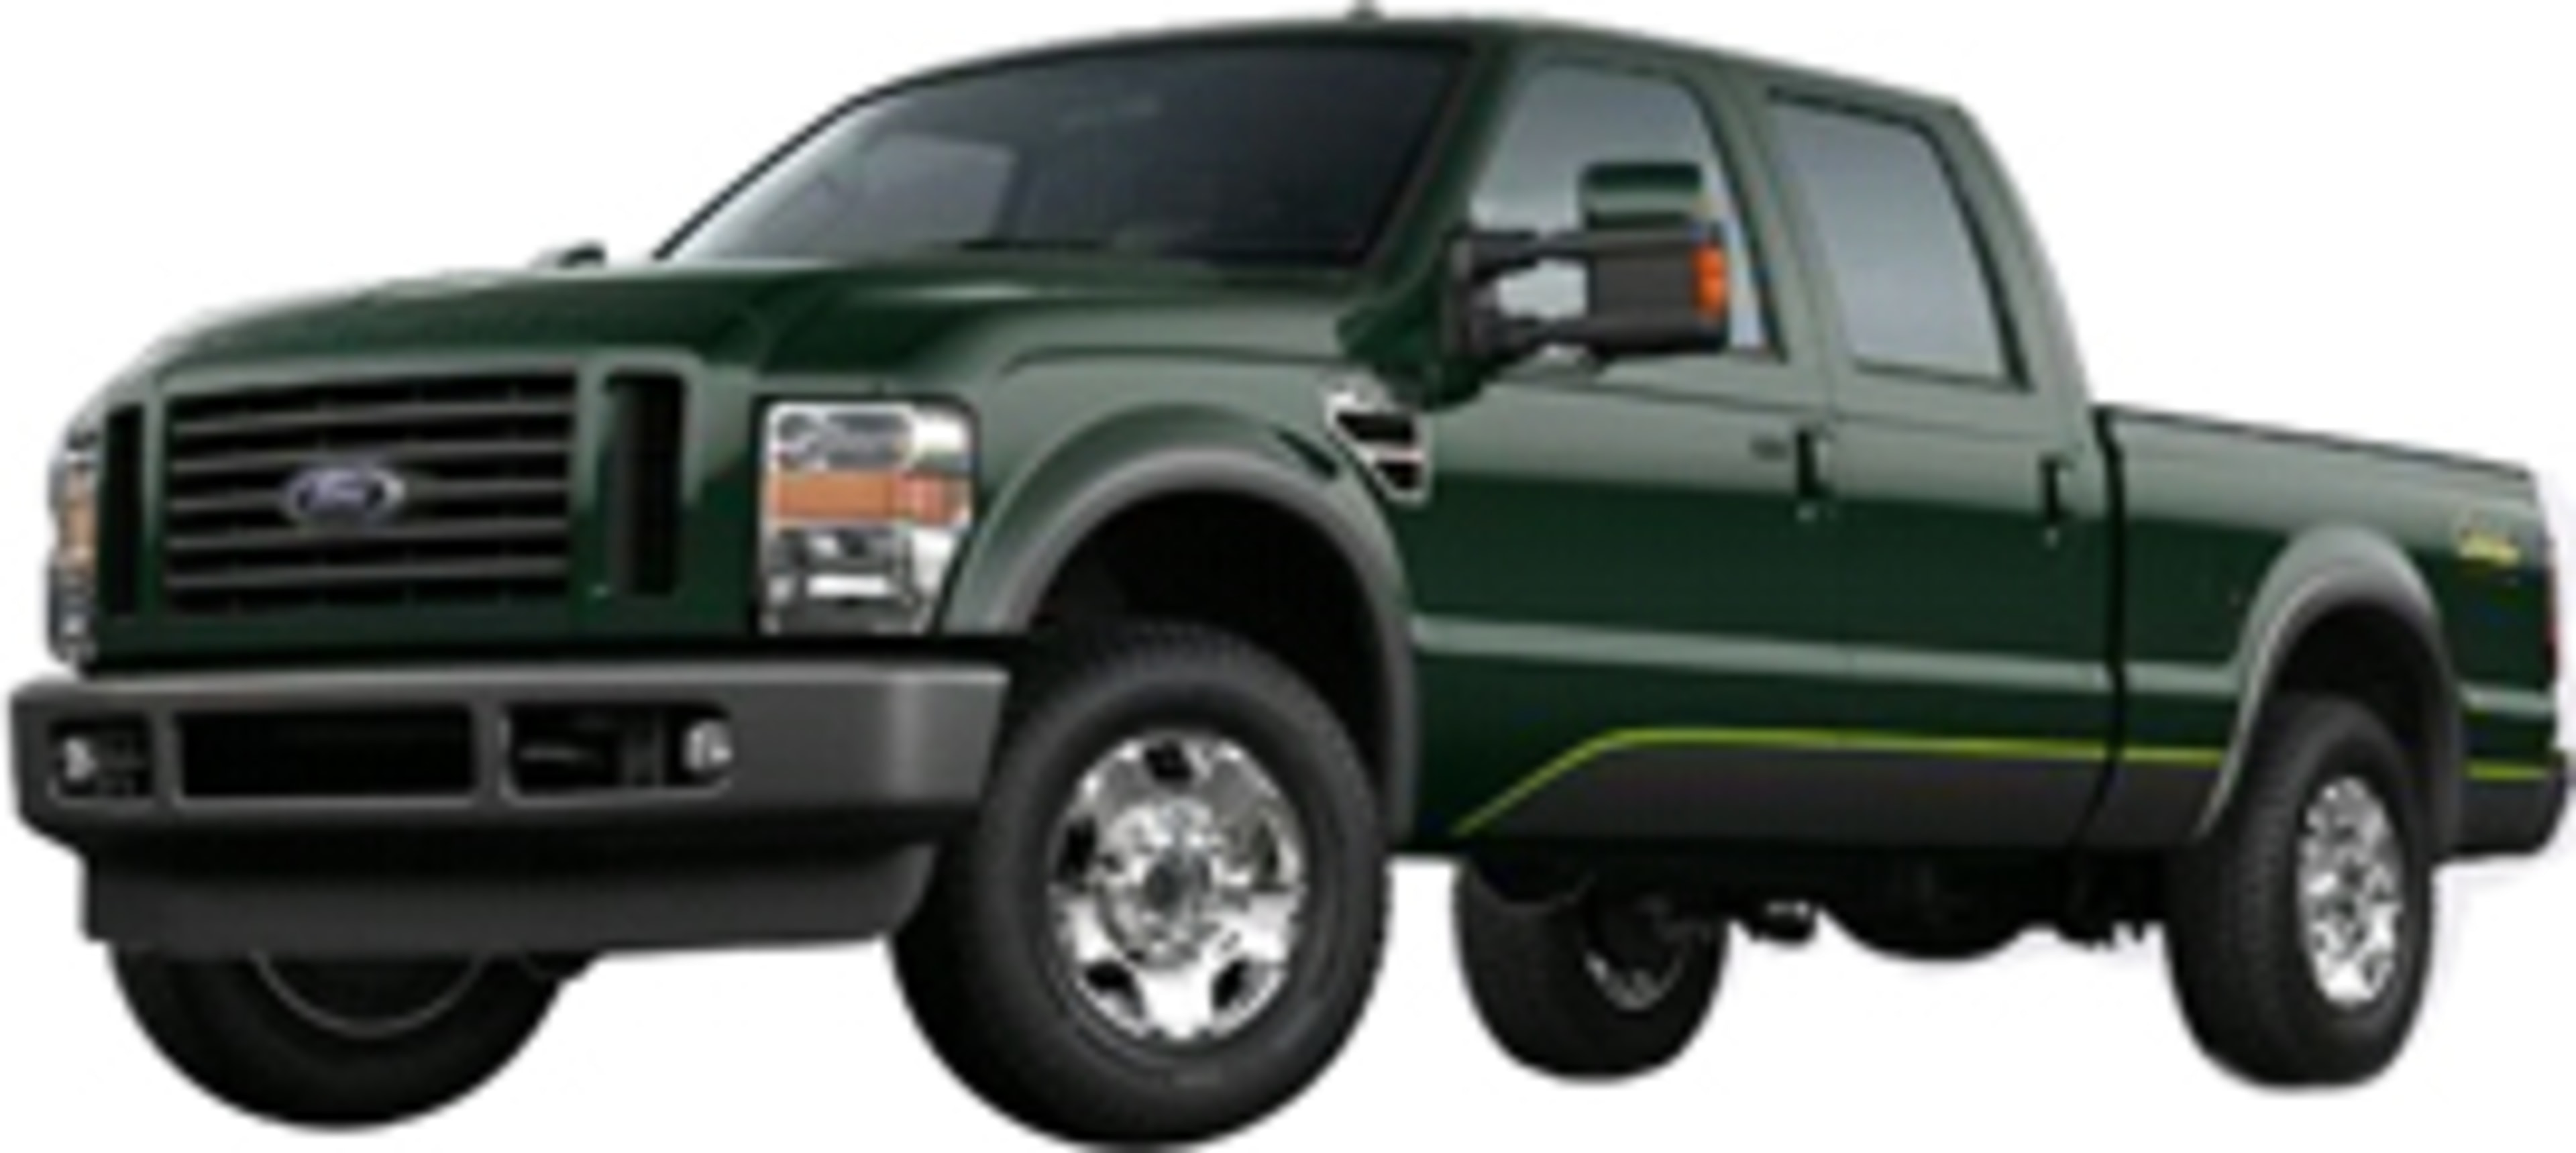 2010 Ford F-350 Super Duty Service and Repair Manual